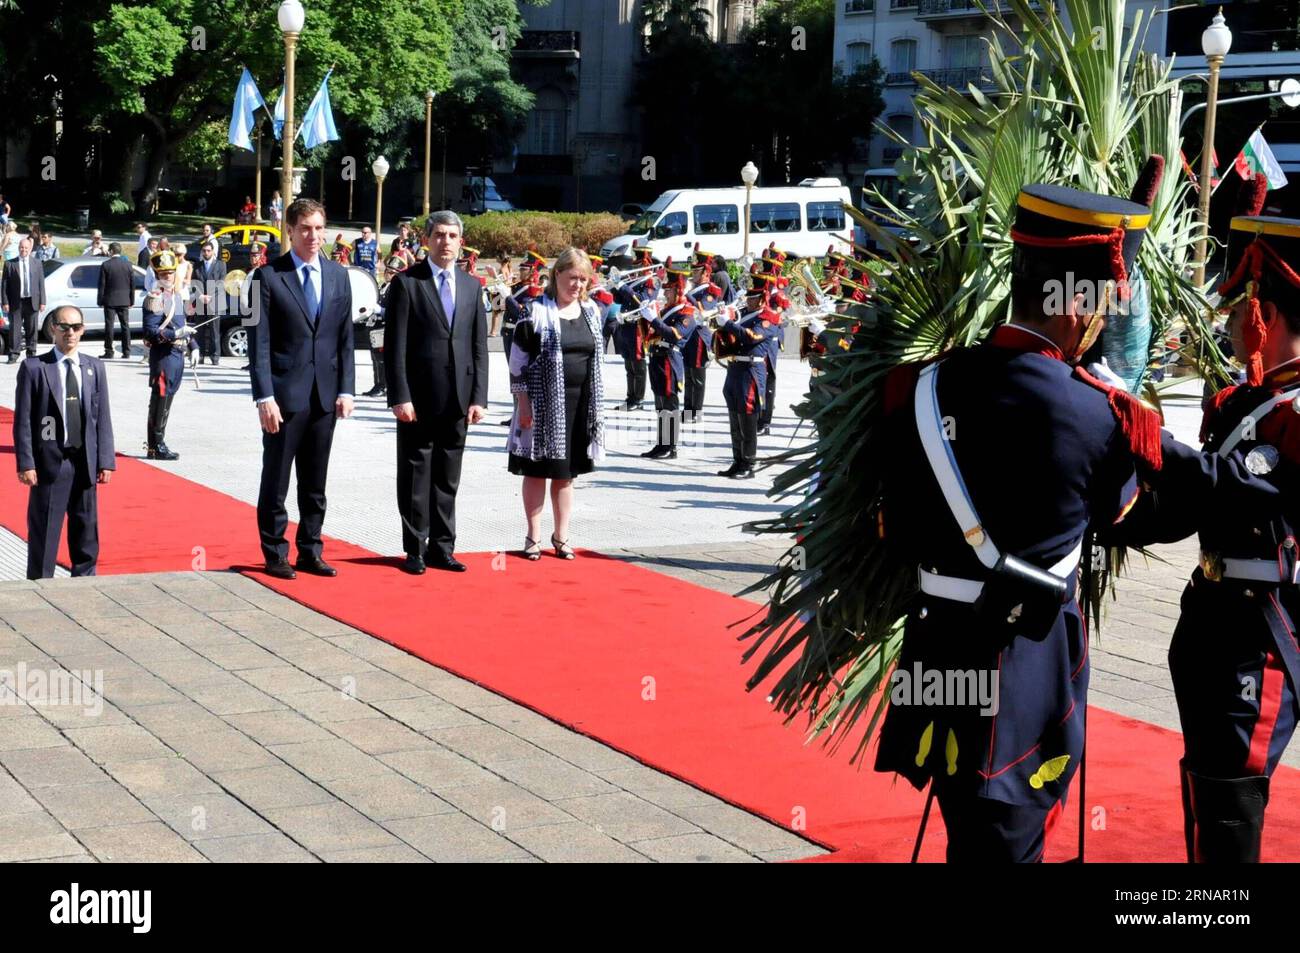 BUENOS AIRES, Feb. 4, 2016 -- Bulgaria s President Rosen Plevneliev (C) and Argentine Foreign Minister Susana Malcorra (R), attend a wreath ceremony at General San Martin Monument, in Plaza San Martin, in Buenos Aires, Argetina, on Feb. 4, 2016. Rosen Plevneliev is on an official visit in Argentina. Daniel Garagiola/Prensa Canciller¨ªa/) (jg) (sp) ARGENTINA-BUENOS AIRES-BULGARIA-POLITICS-VISIT TELAM PUBLICATIONxNOTxINxCHN   Buenos Aires Feb 4 2016 Bulgaria S President Roses Plevneliev C and Argentine Foreign Ministers Susana Malcorra r attend a Wreath Ceremony AT General San Martin Monument in Stock Photo